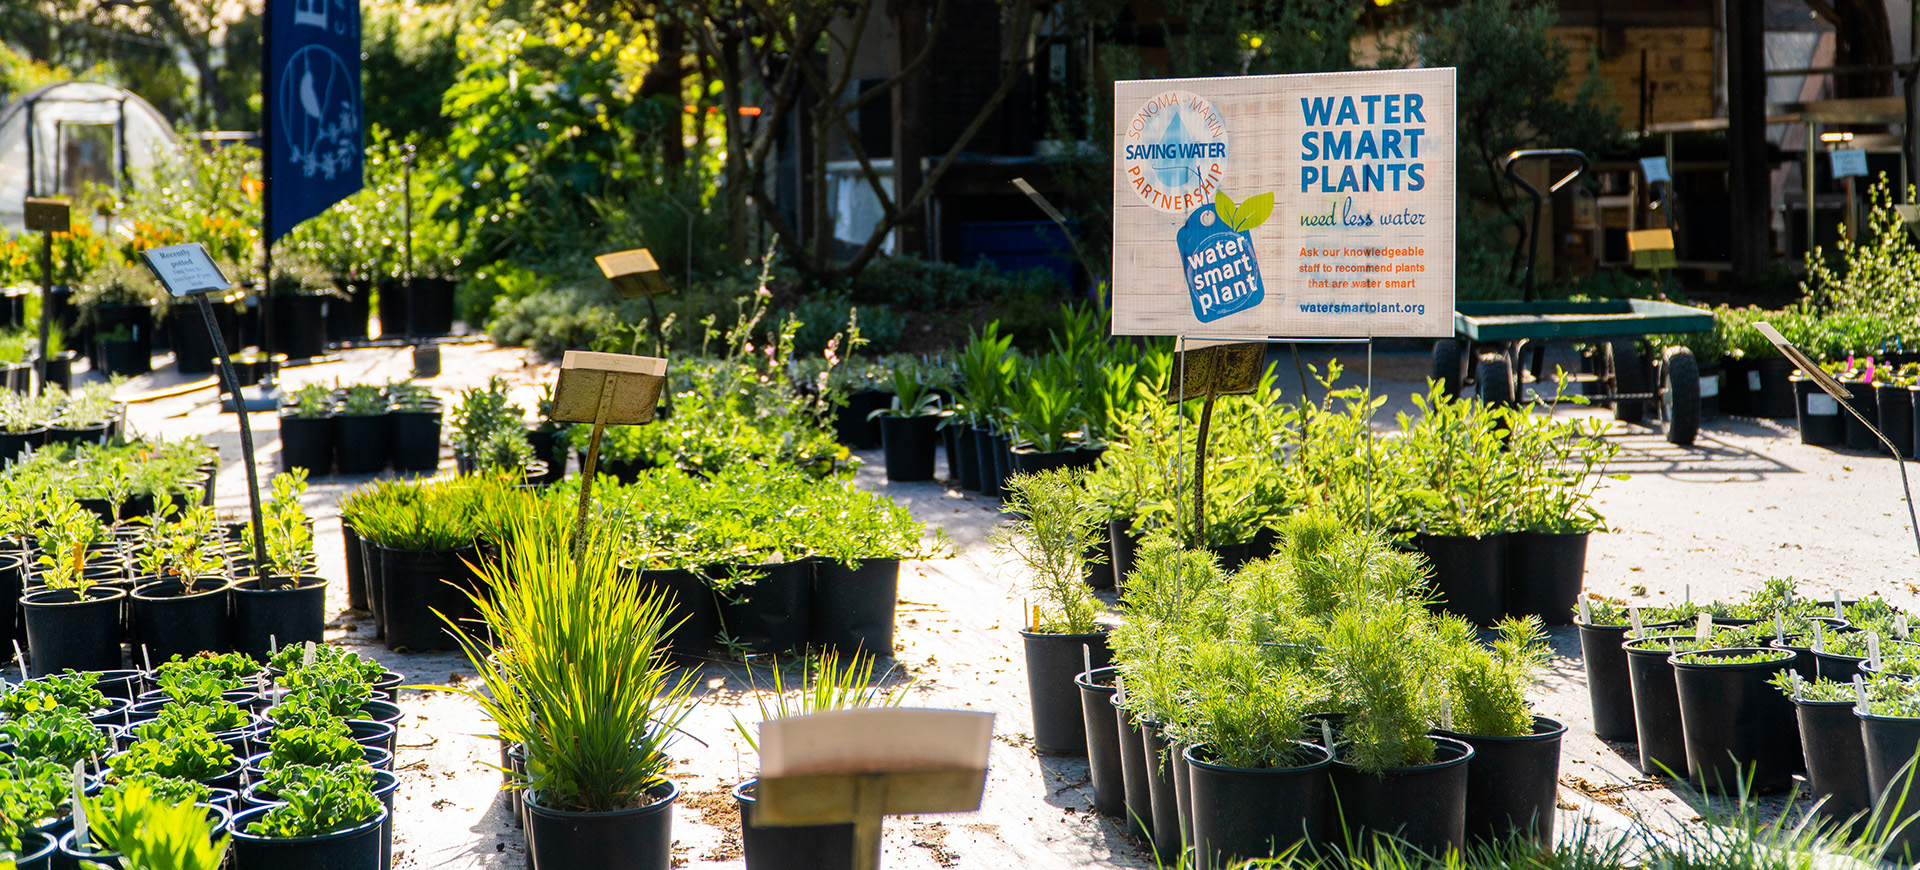 Water Smart Plant label featured at a plant nursery